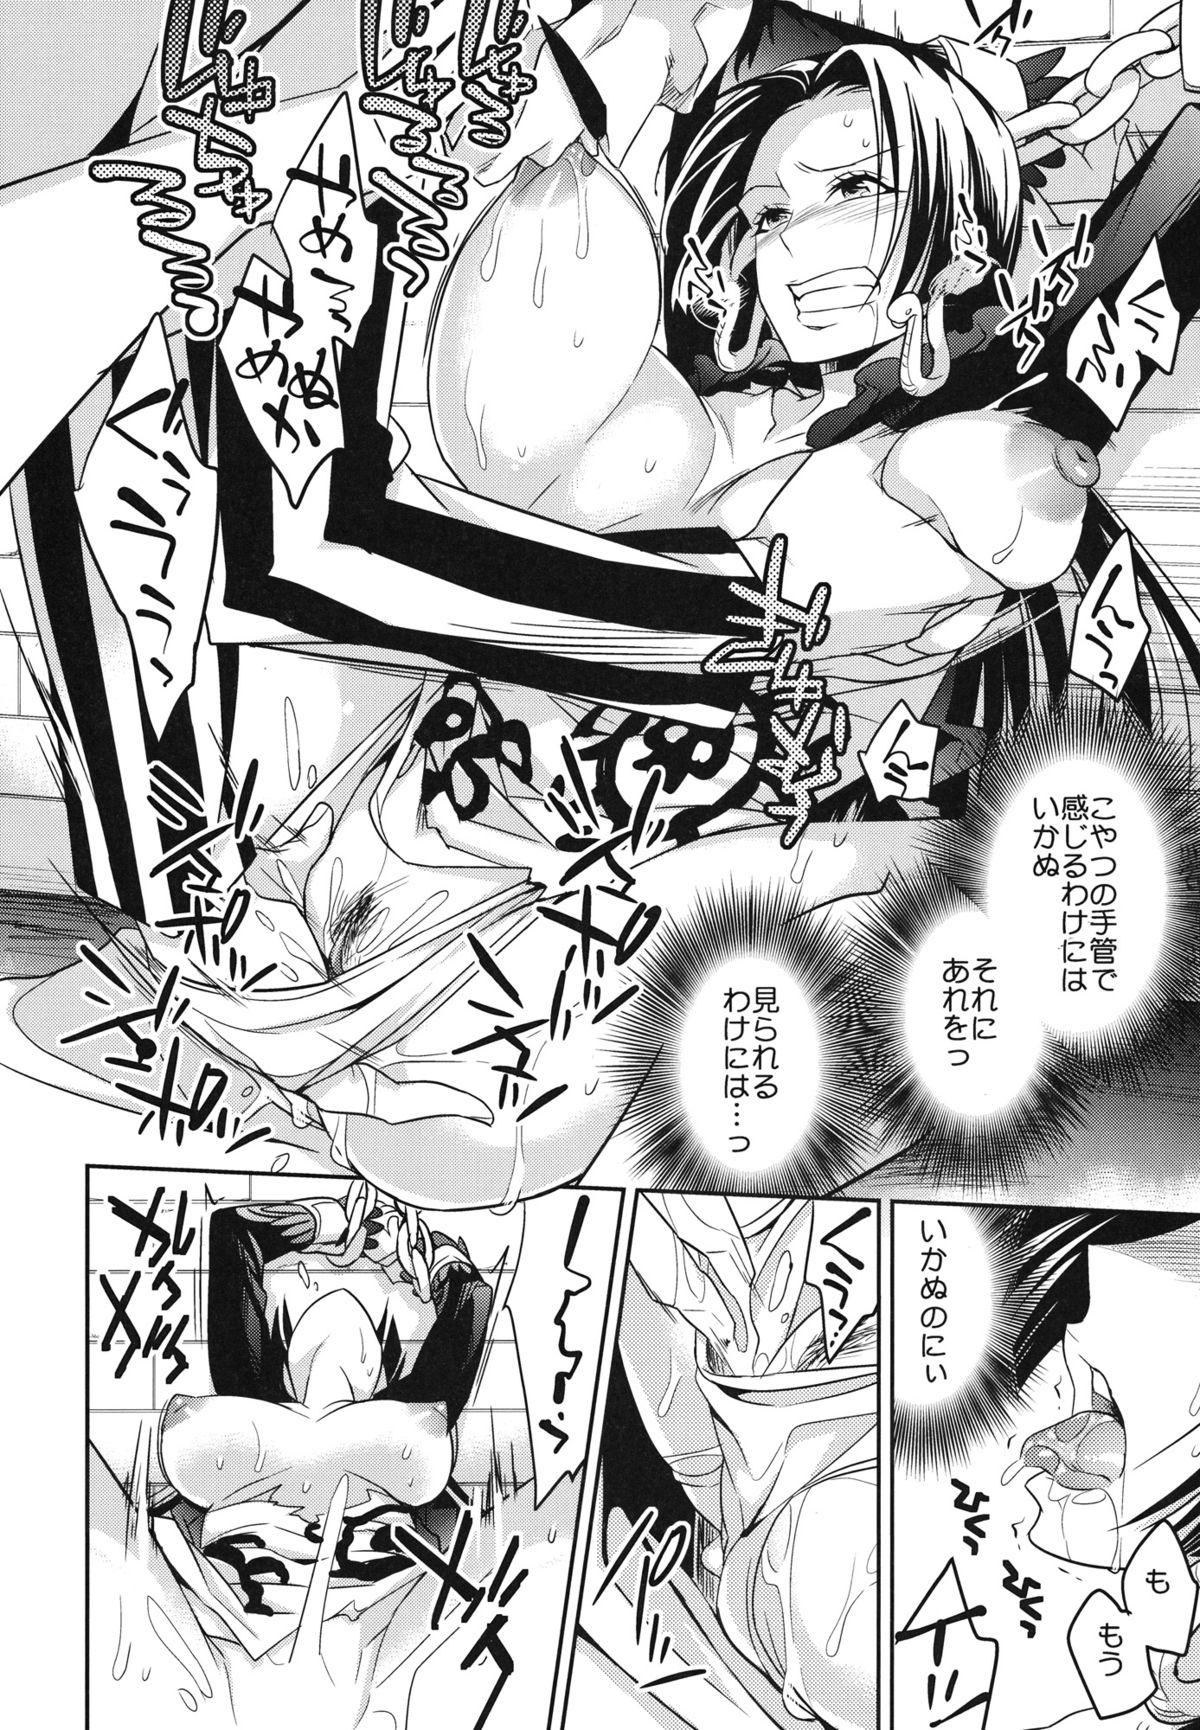 Exhibitionist C9-05 Amai Doku - One piece Screaming - Page 9